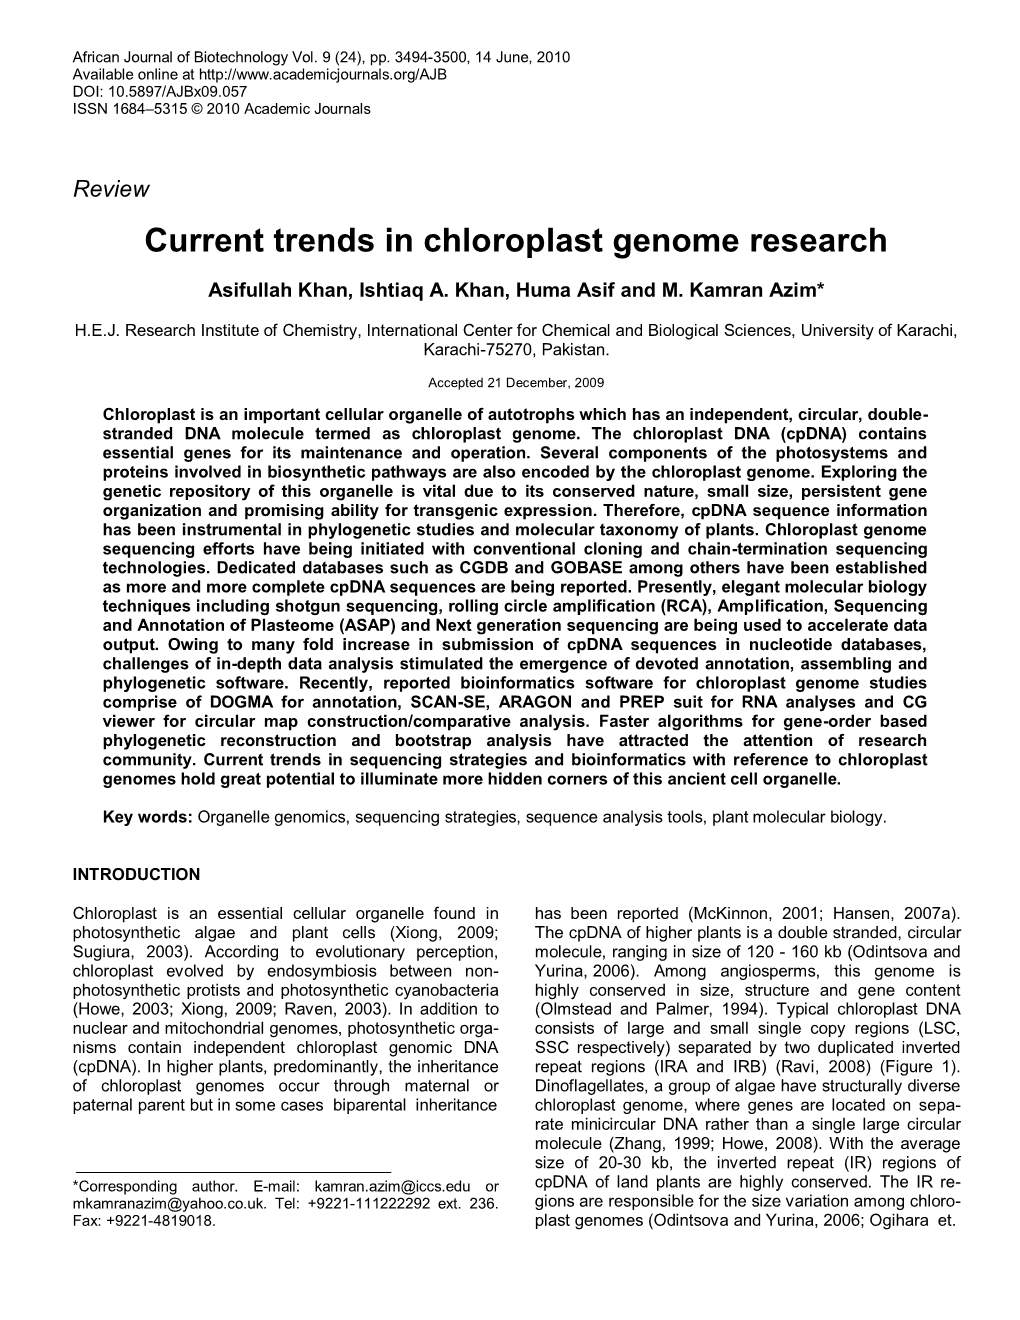 Current Trends in Chloroplast Genome Research